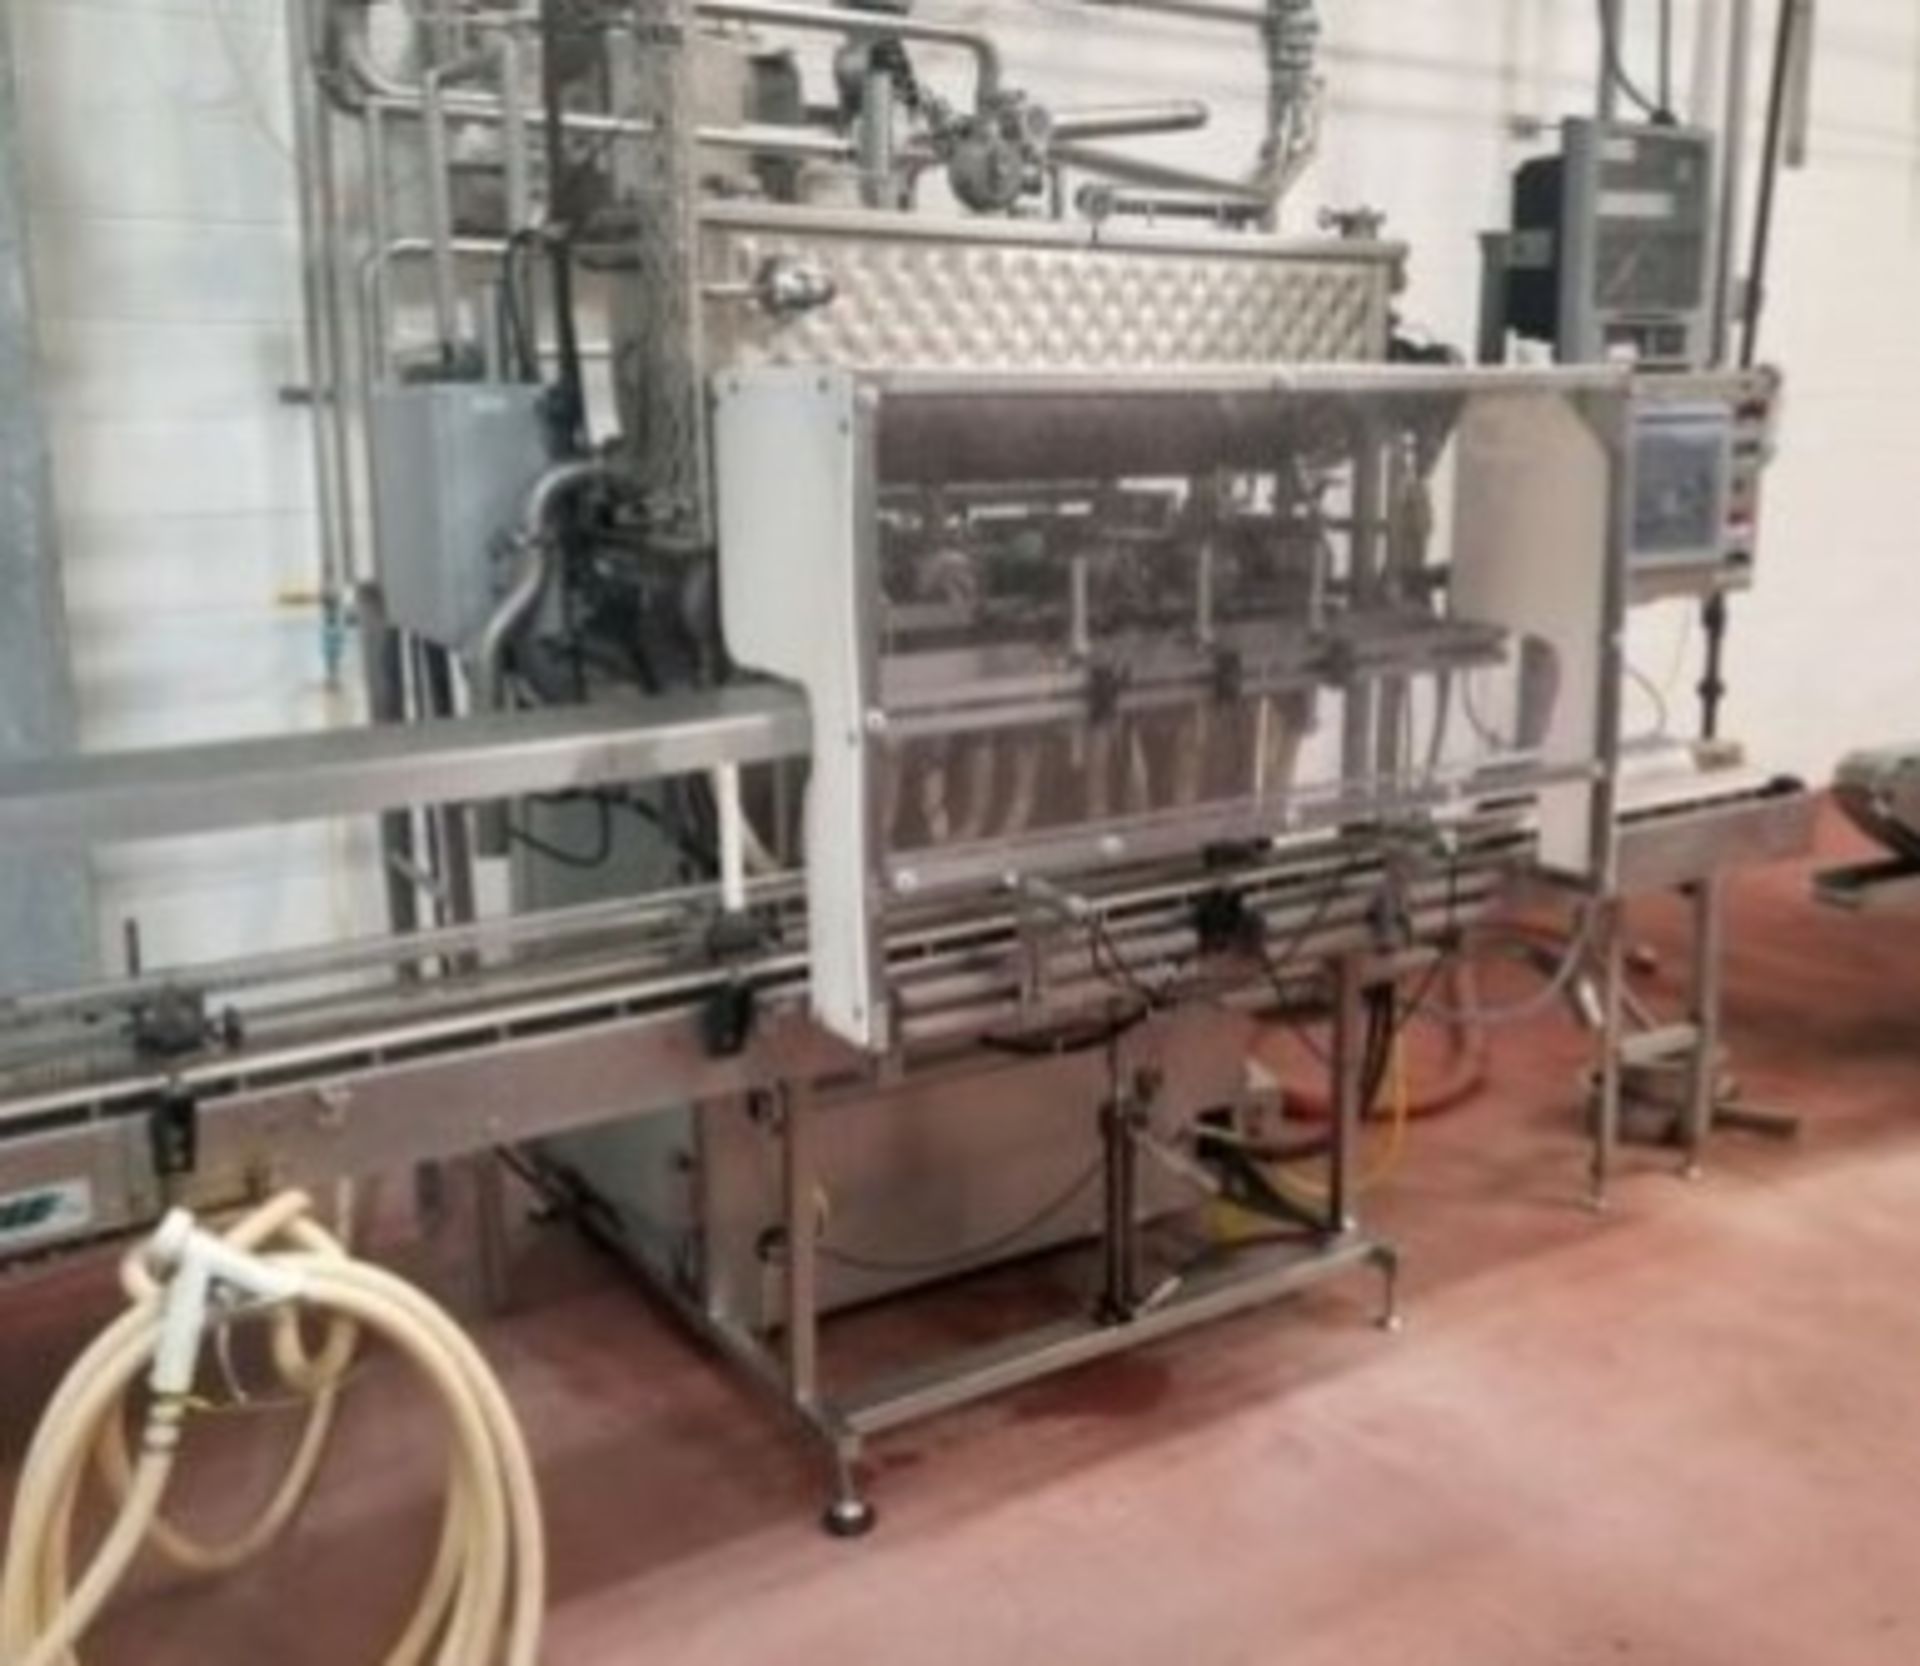 REB IVS-6 Head Hot Fill Piston Filler with Steam Jacketed 195° Mix Hopper, 460V 3PH, Top to Bottom / - Image 2 of 4